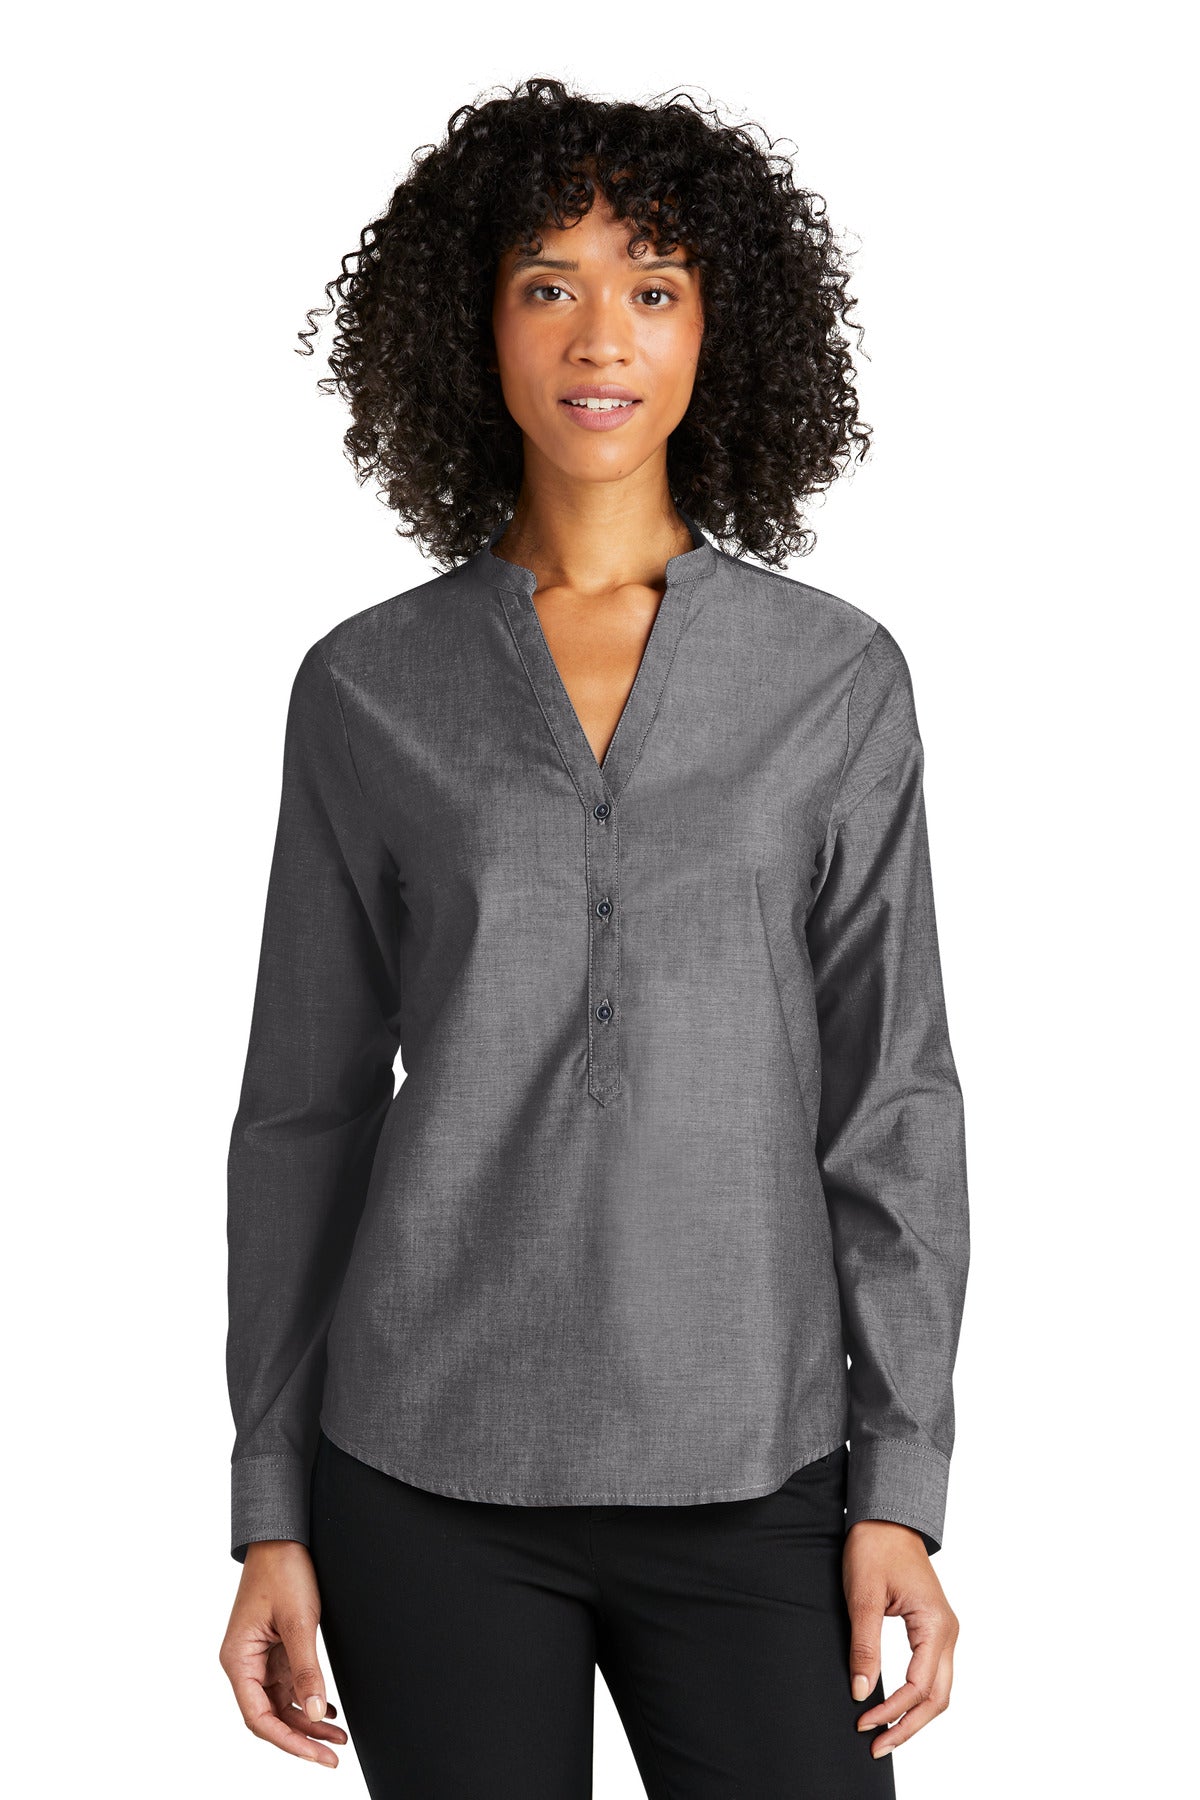 Ladies Long Sleeve Chambray Easy Care Shirt LW382